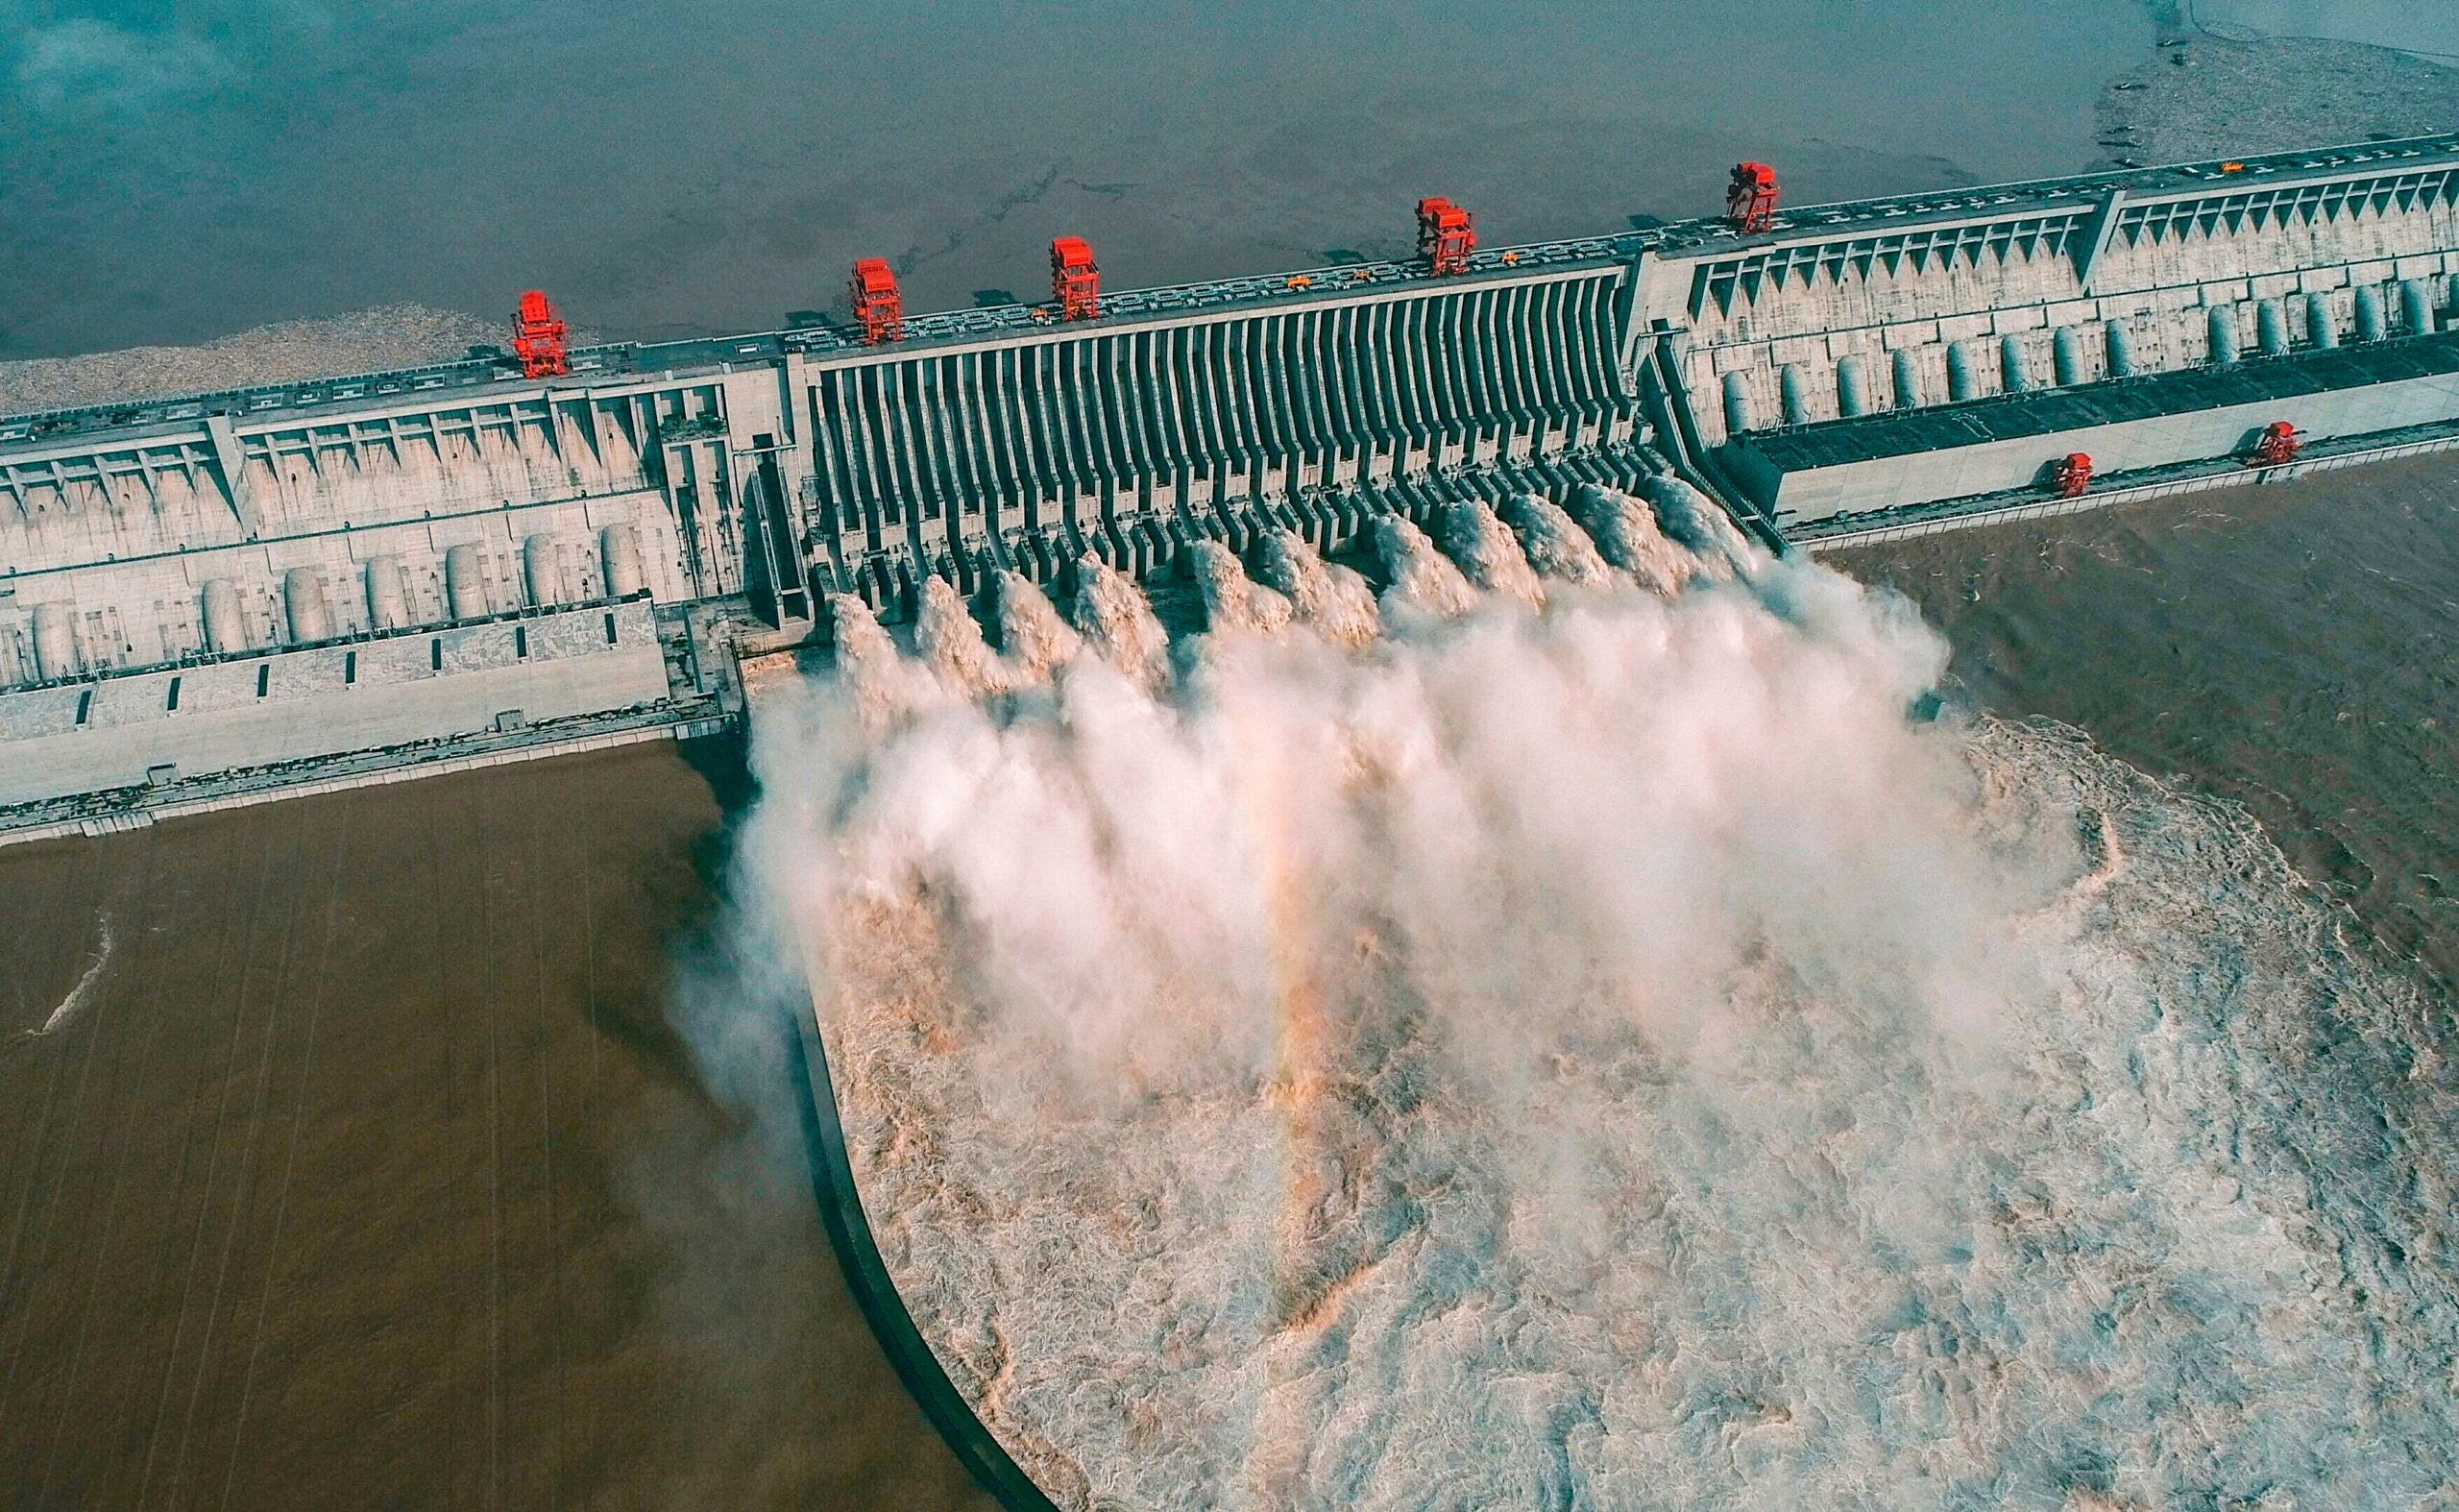 Can hydropower be part of a clean energy future?